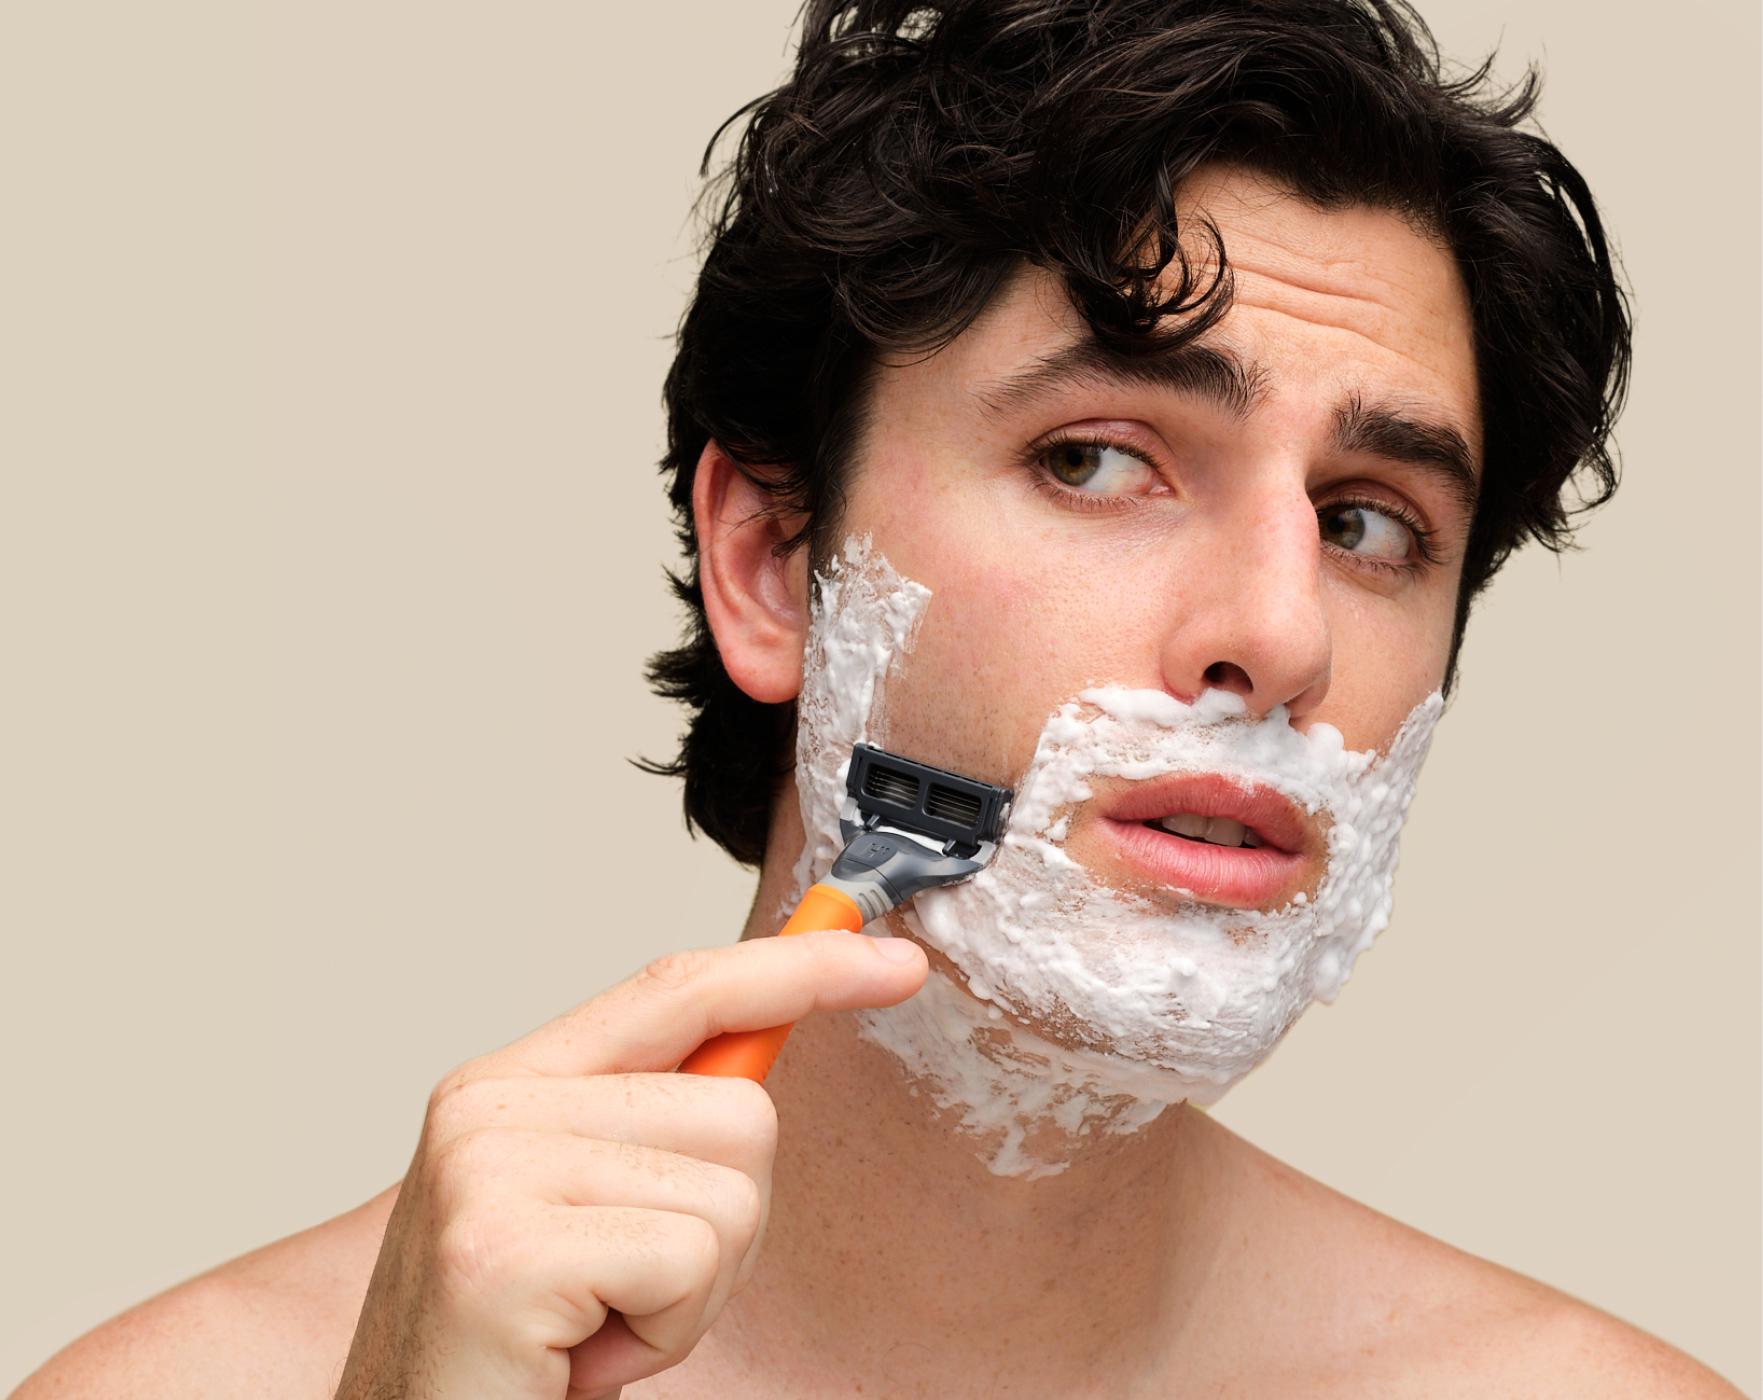 An image of a man shaving with precision using Harry's blades, achieving a clean and smooth shave.